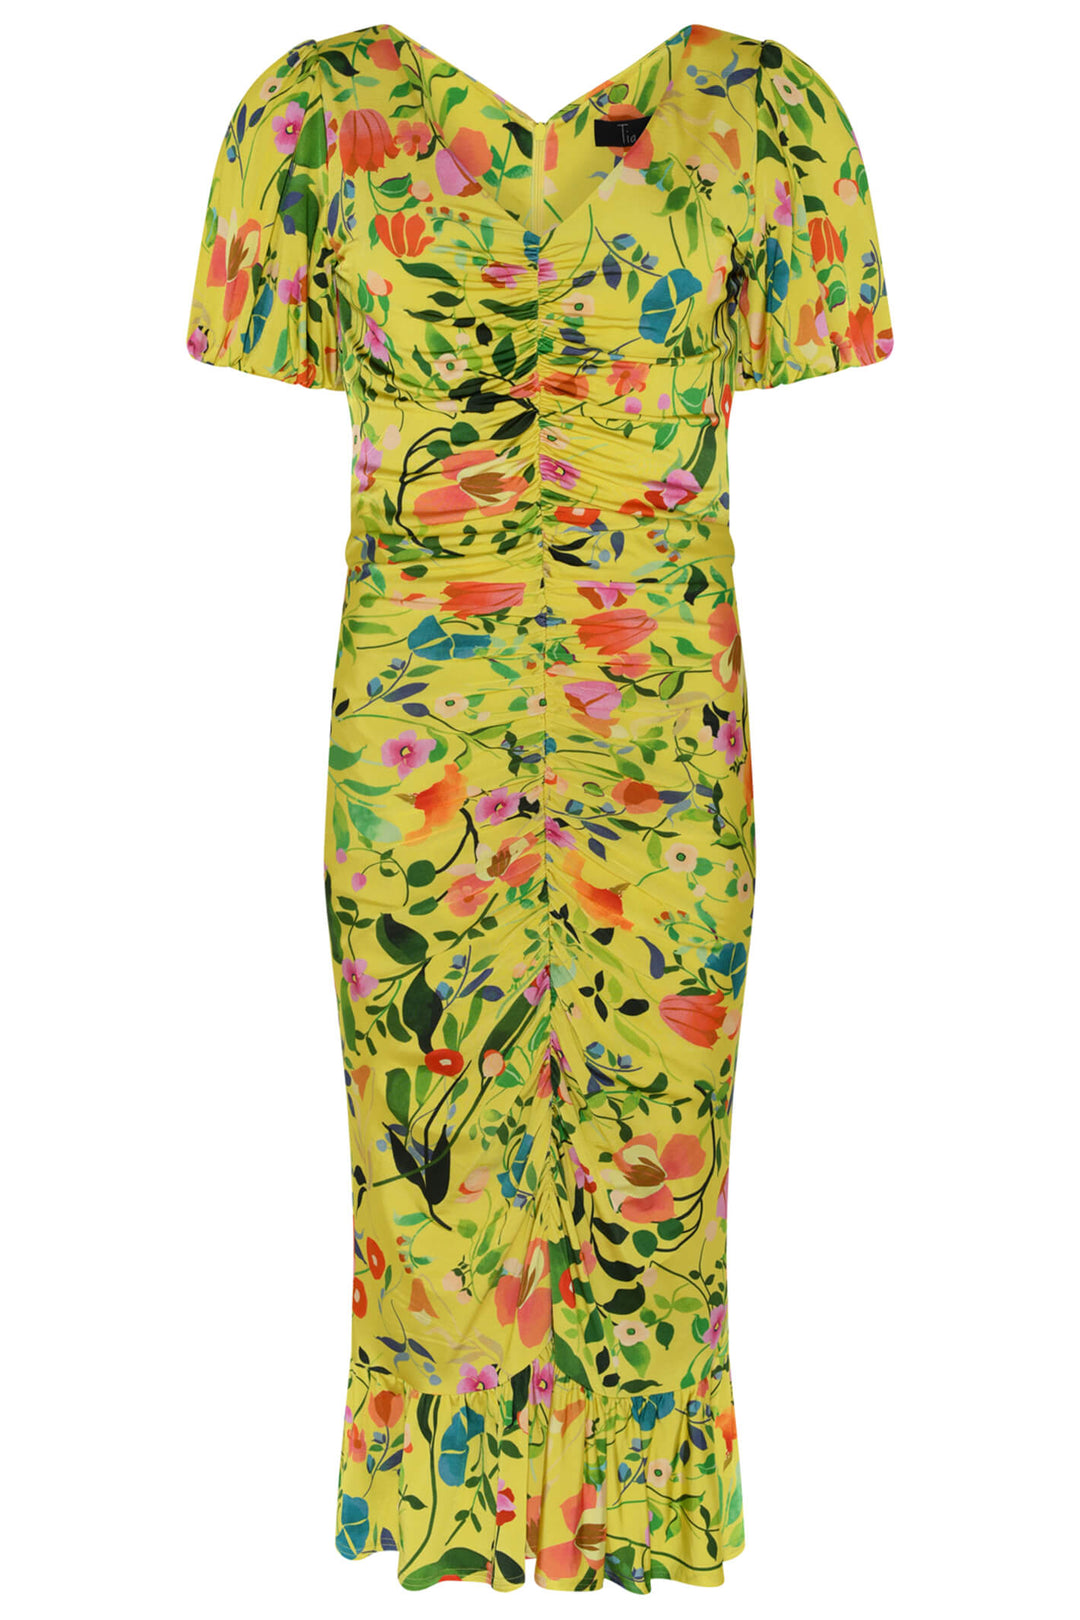 Tia 78621 Yellow Floral Print Ruched Dress